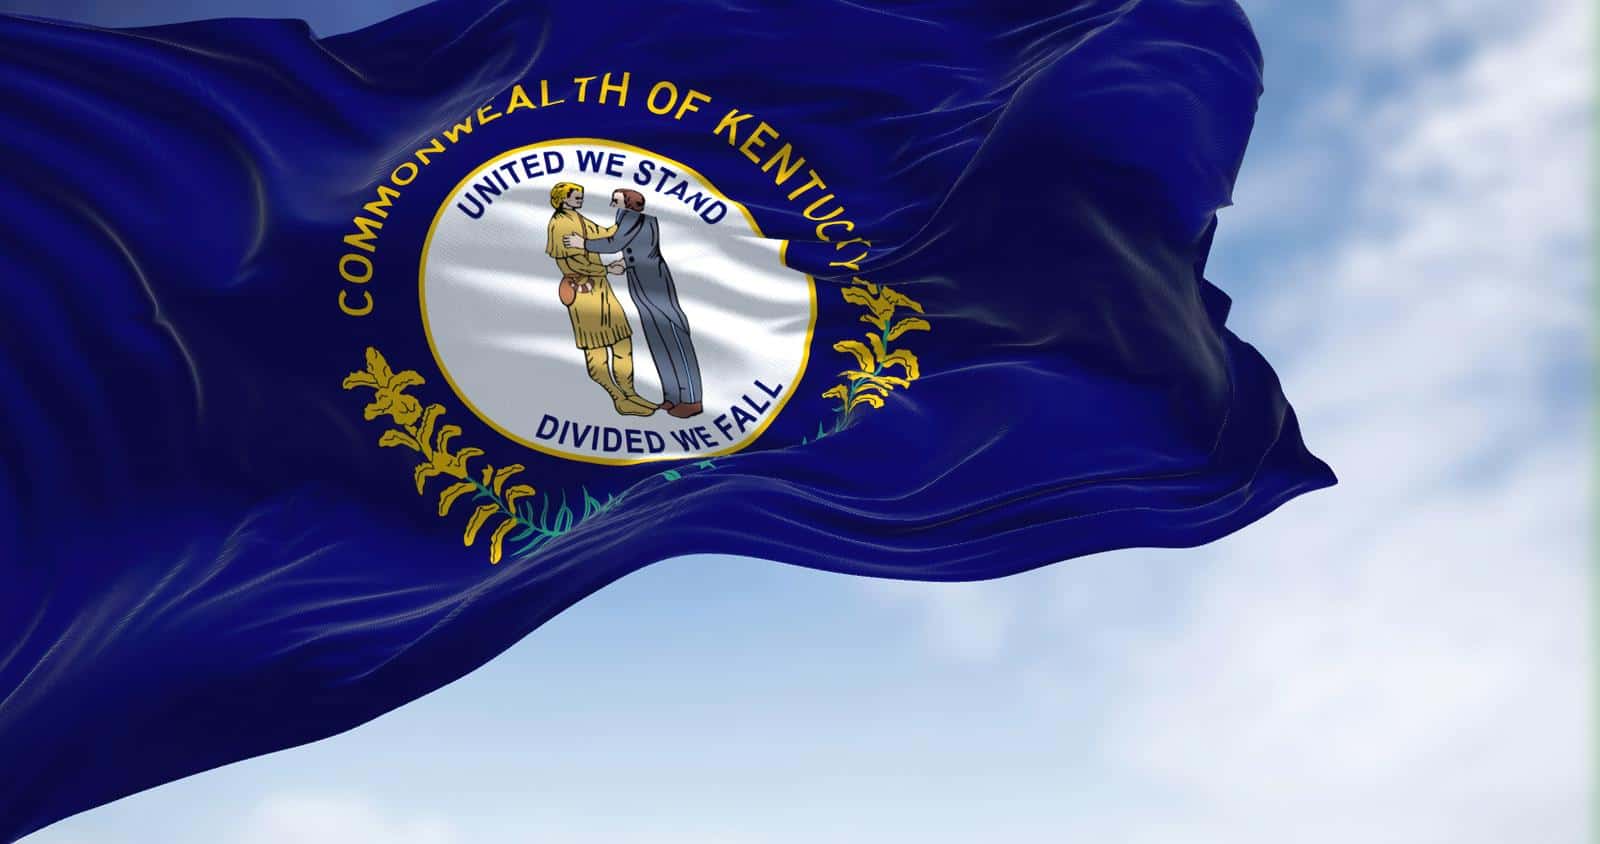 The US state flag of Kentucky waving in the wind. Kentucky is a state in the Southeastern region of the United States. Democracy and independence.